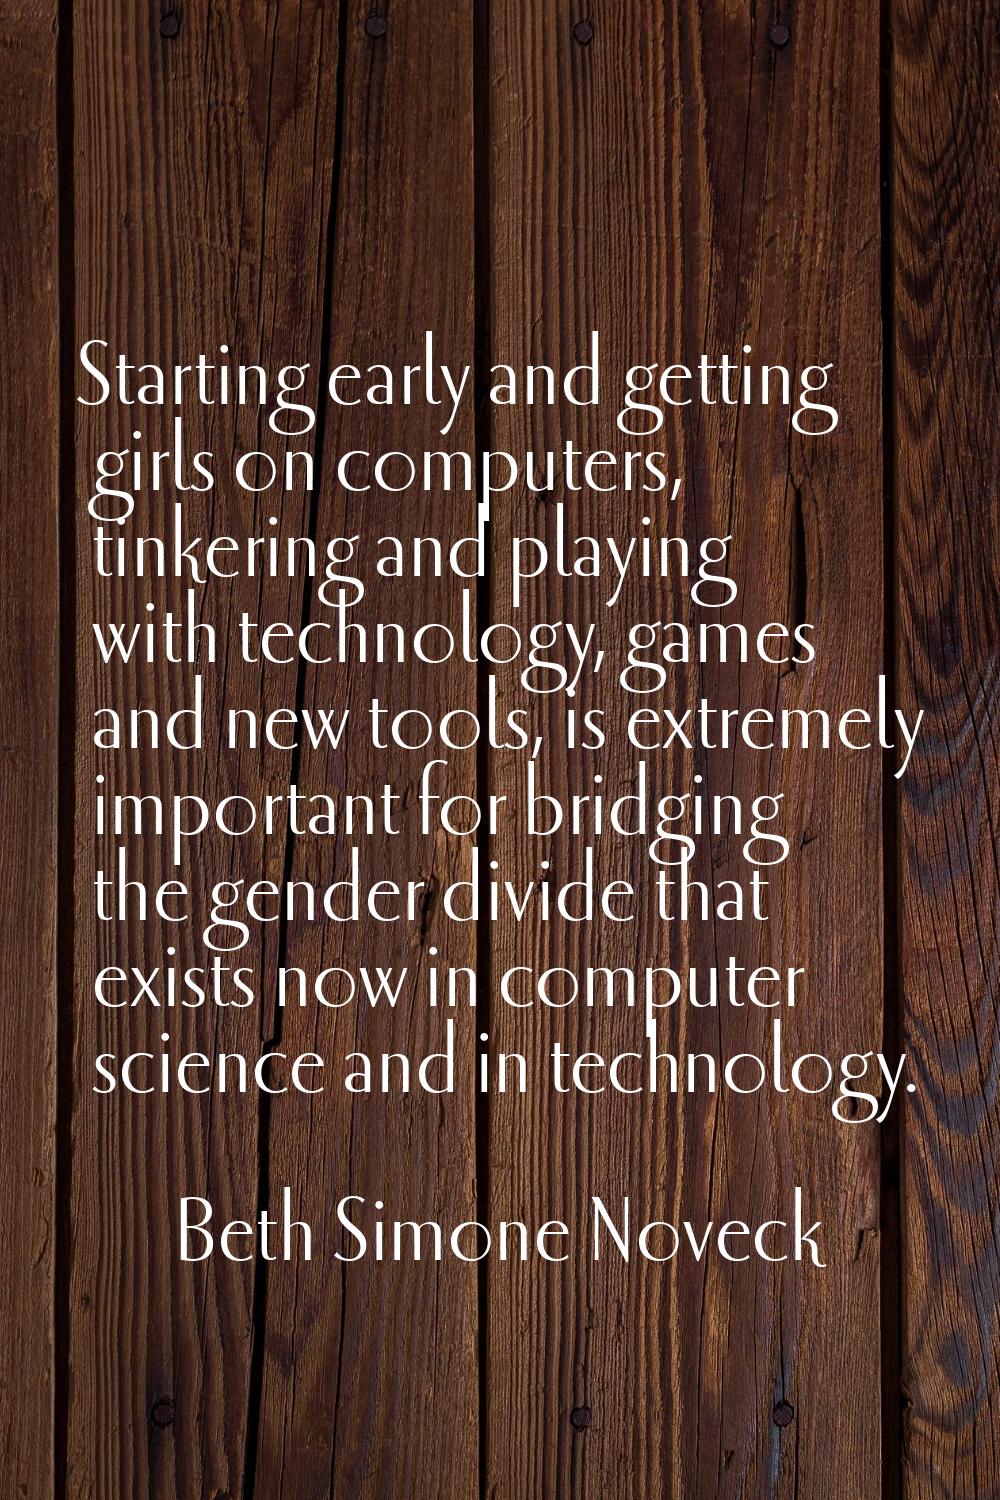 Starting early and getting girls on computers, tinkering and playing with technology, games and new